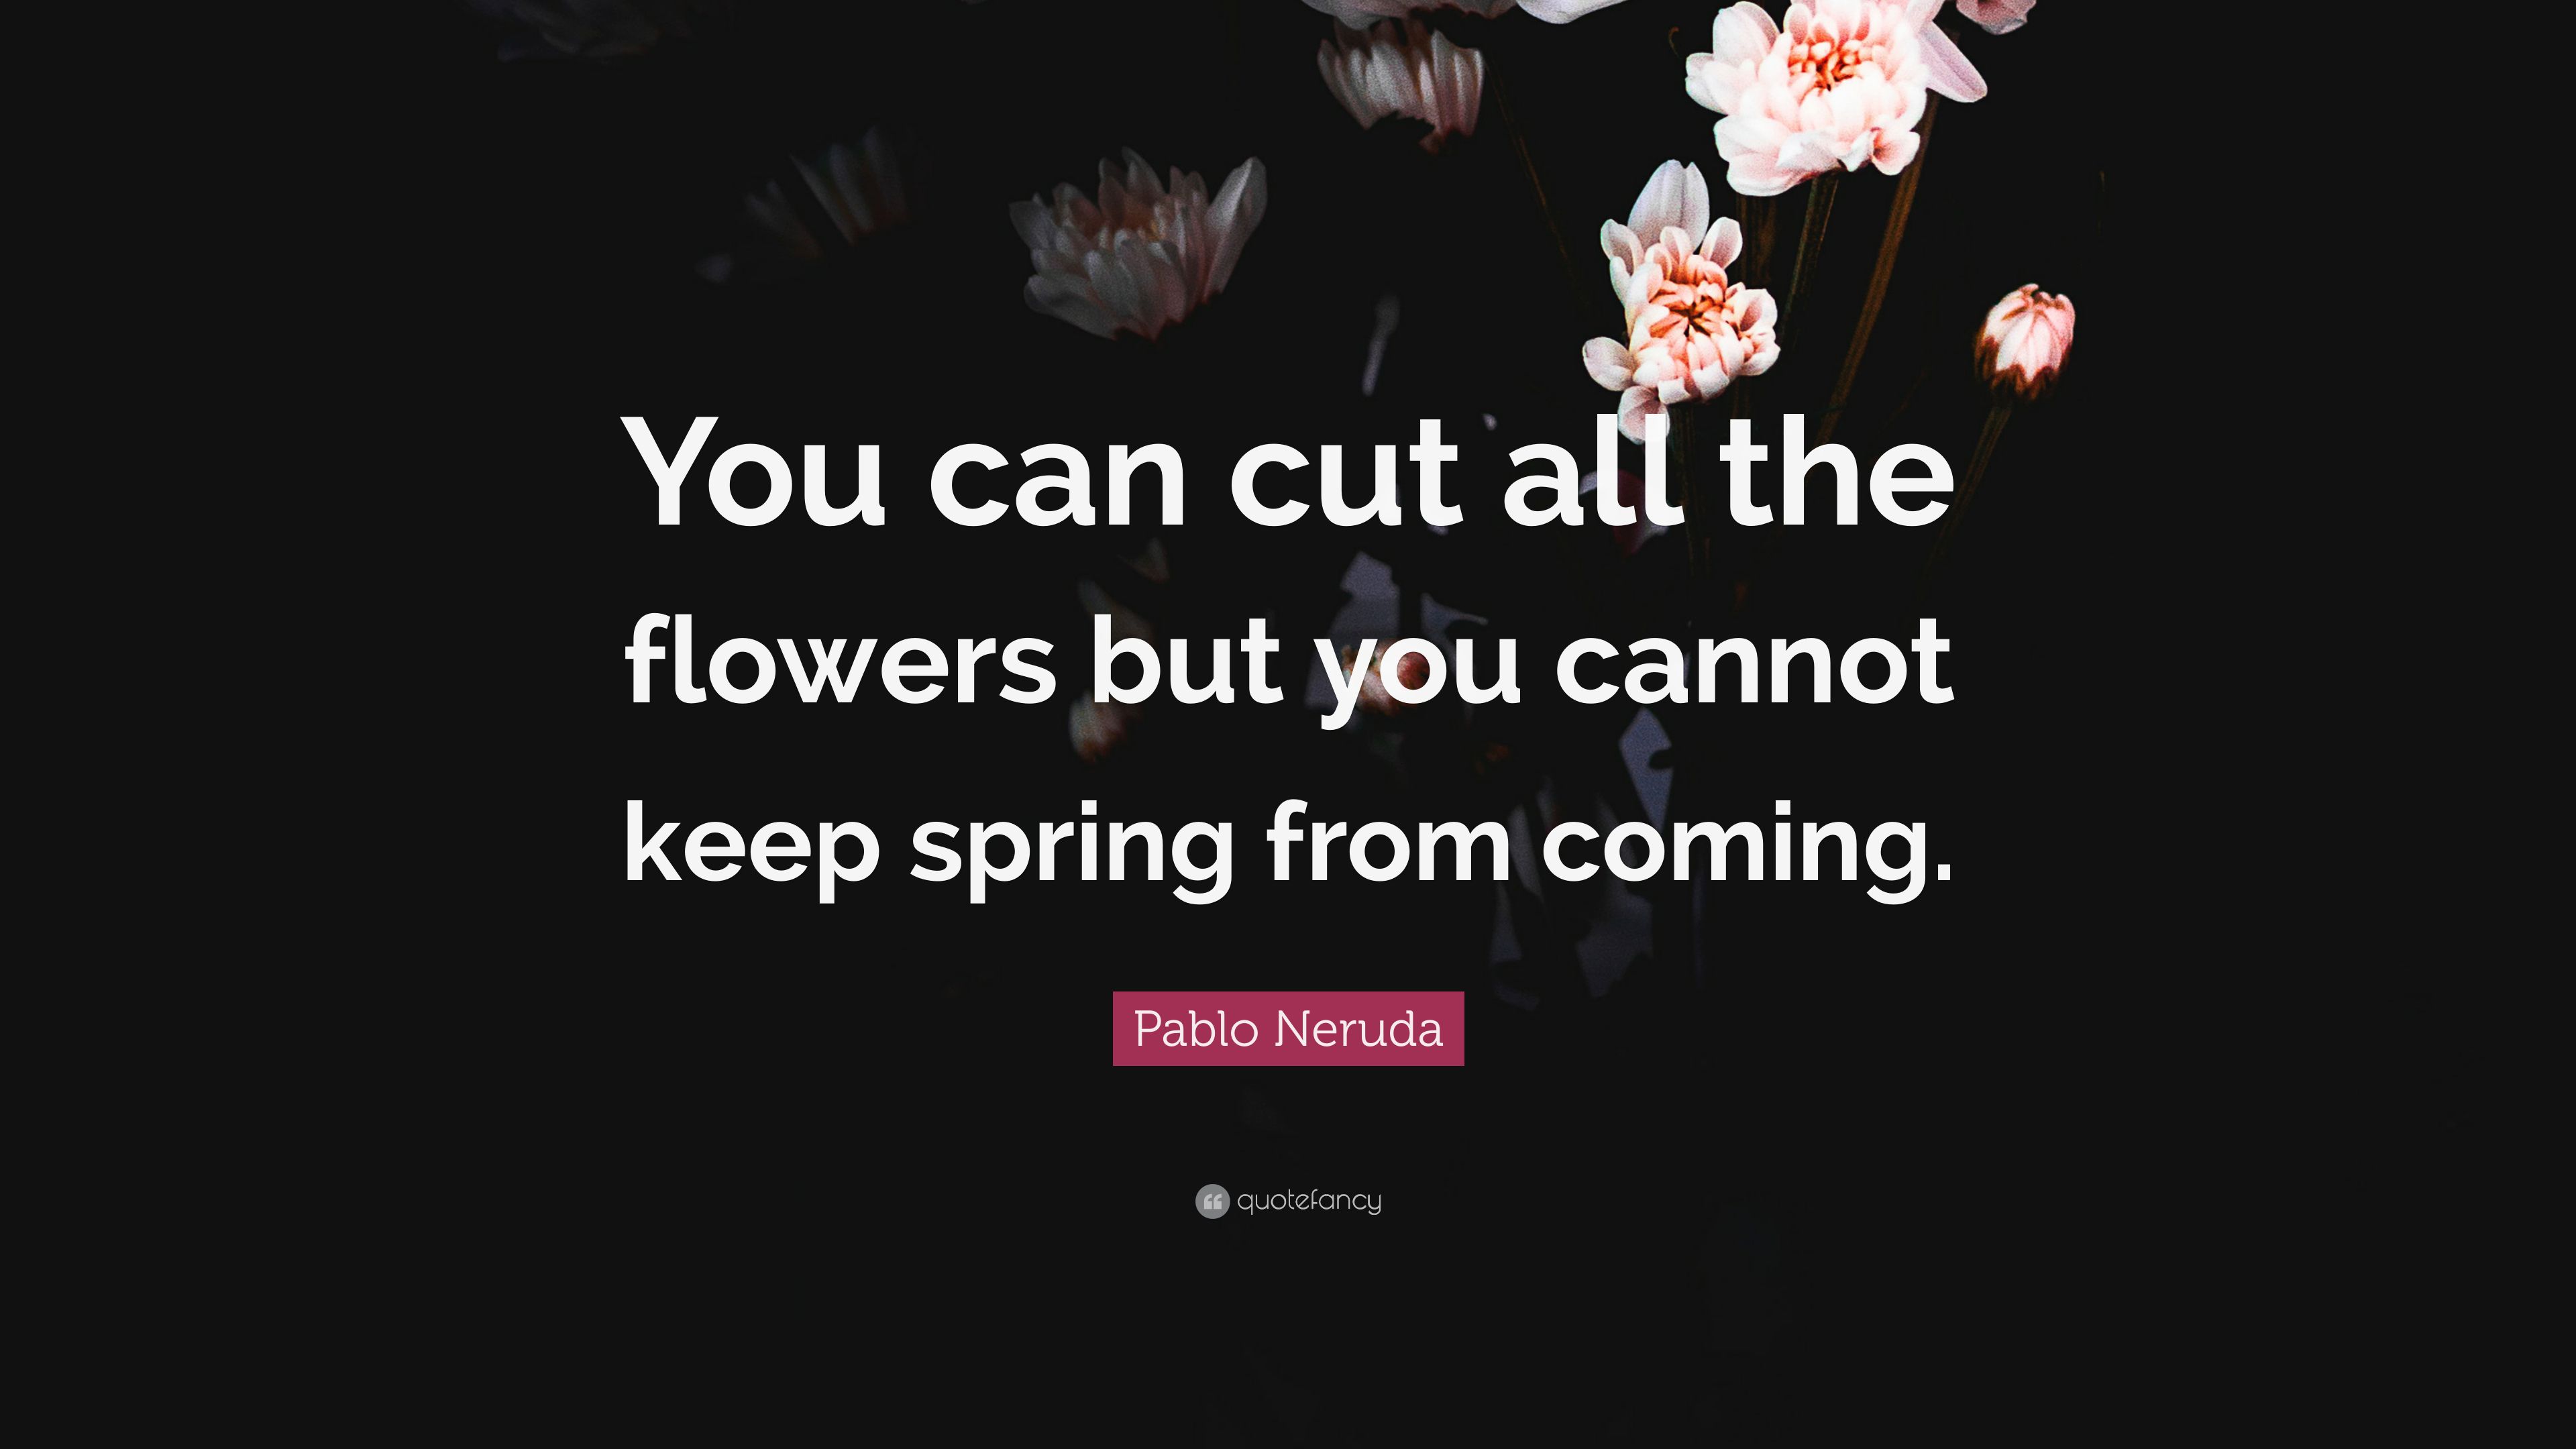 Pablo Neruda Quote: “You can cut all the flowers but you cannot